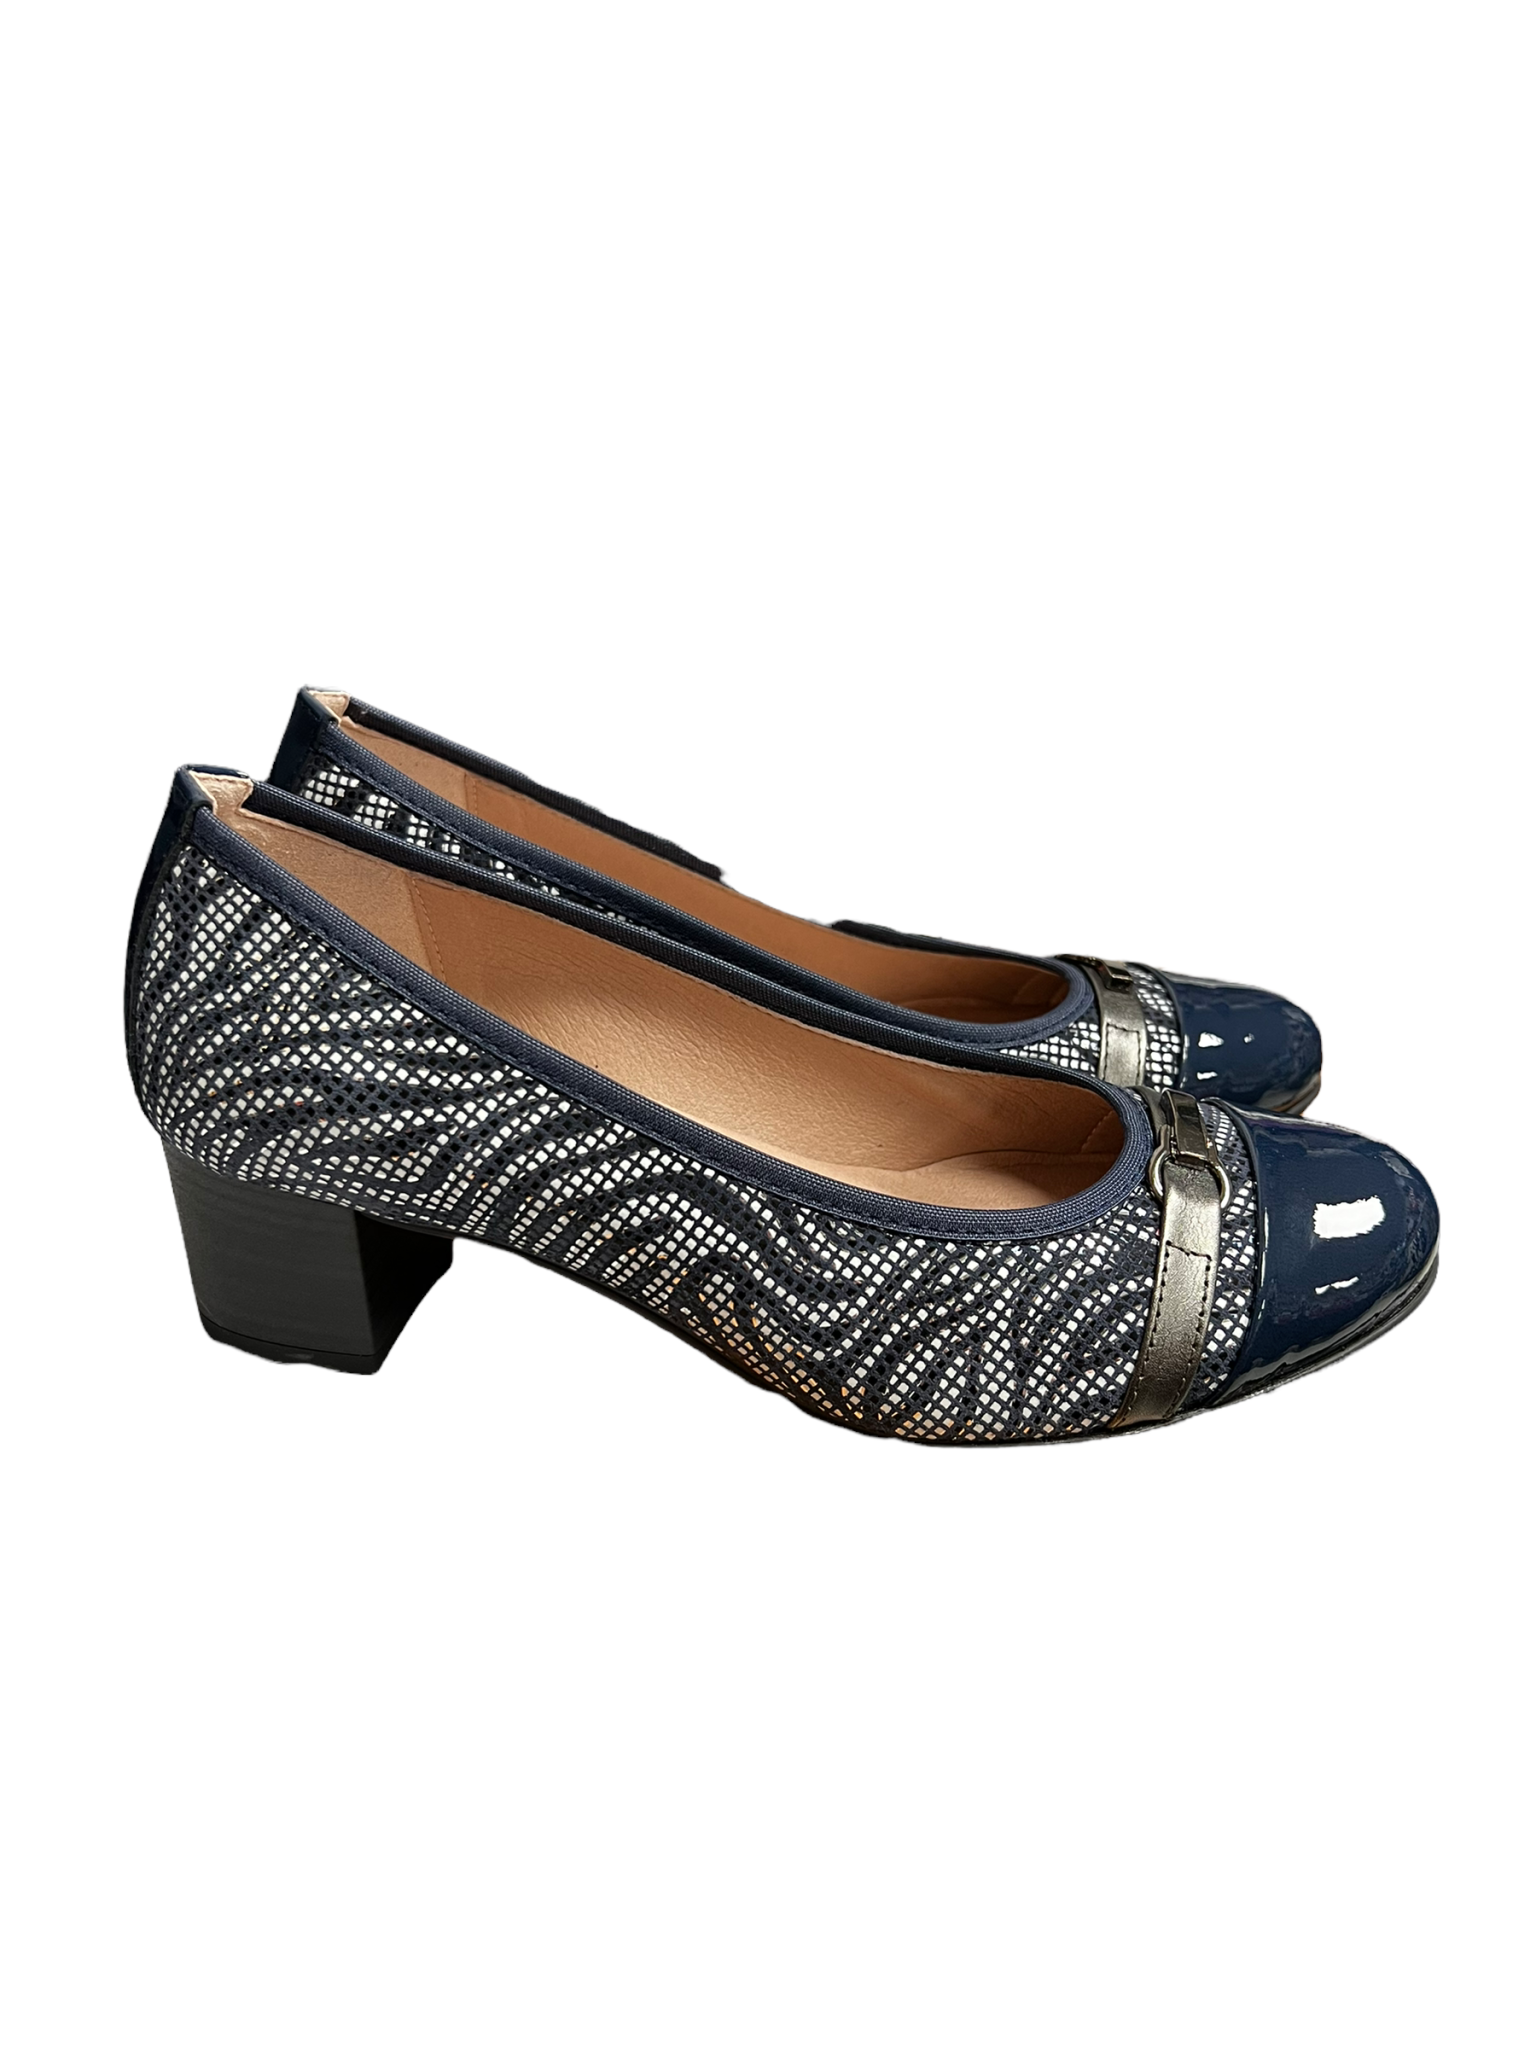 Navy Textured Pump with Patent Toe